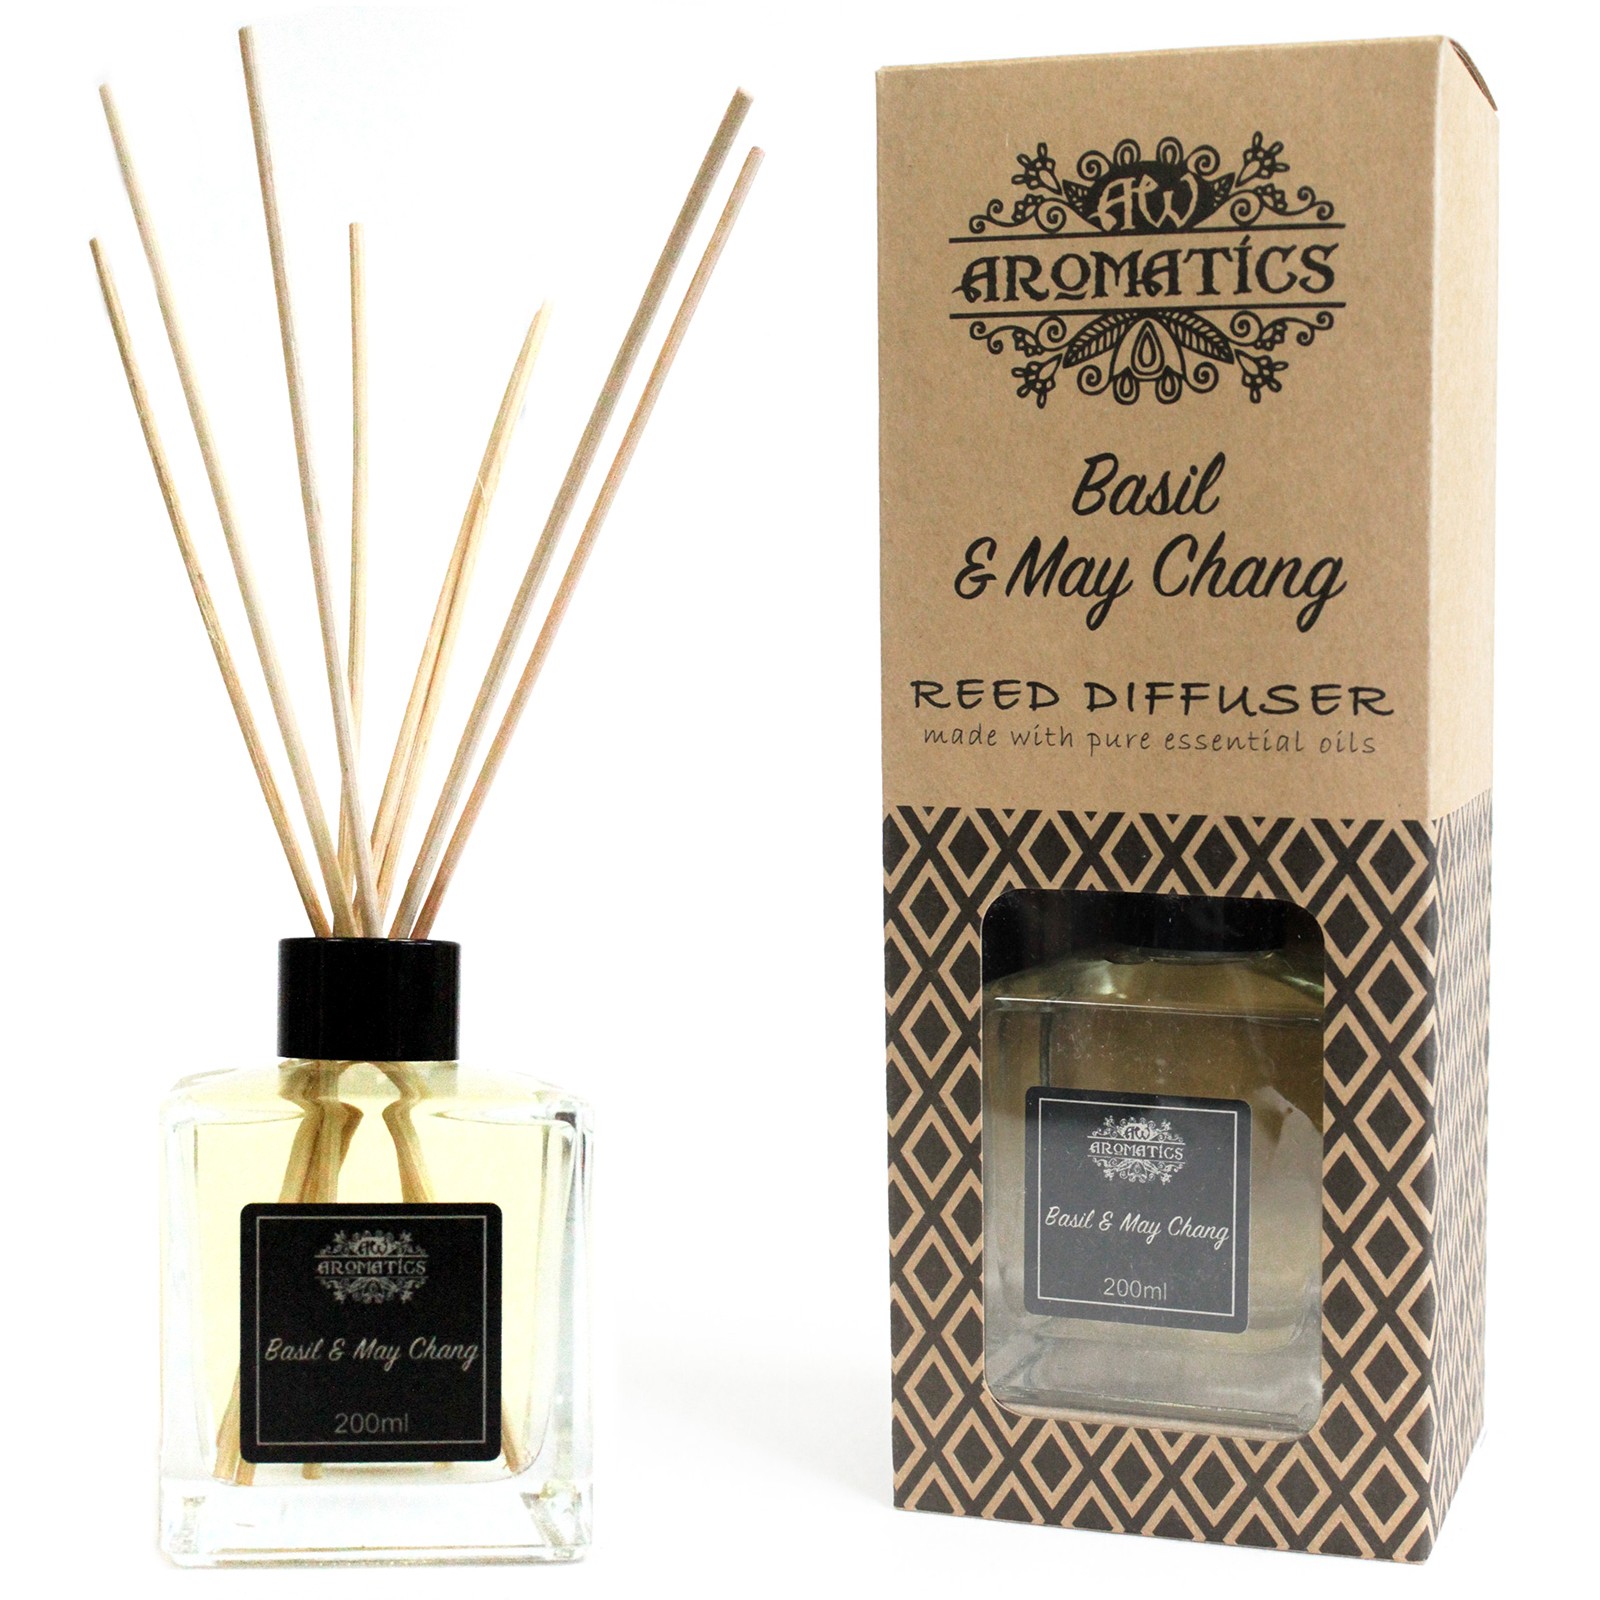 200ml Essential Oil Reed Diffuser - Basil & May Chang